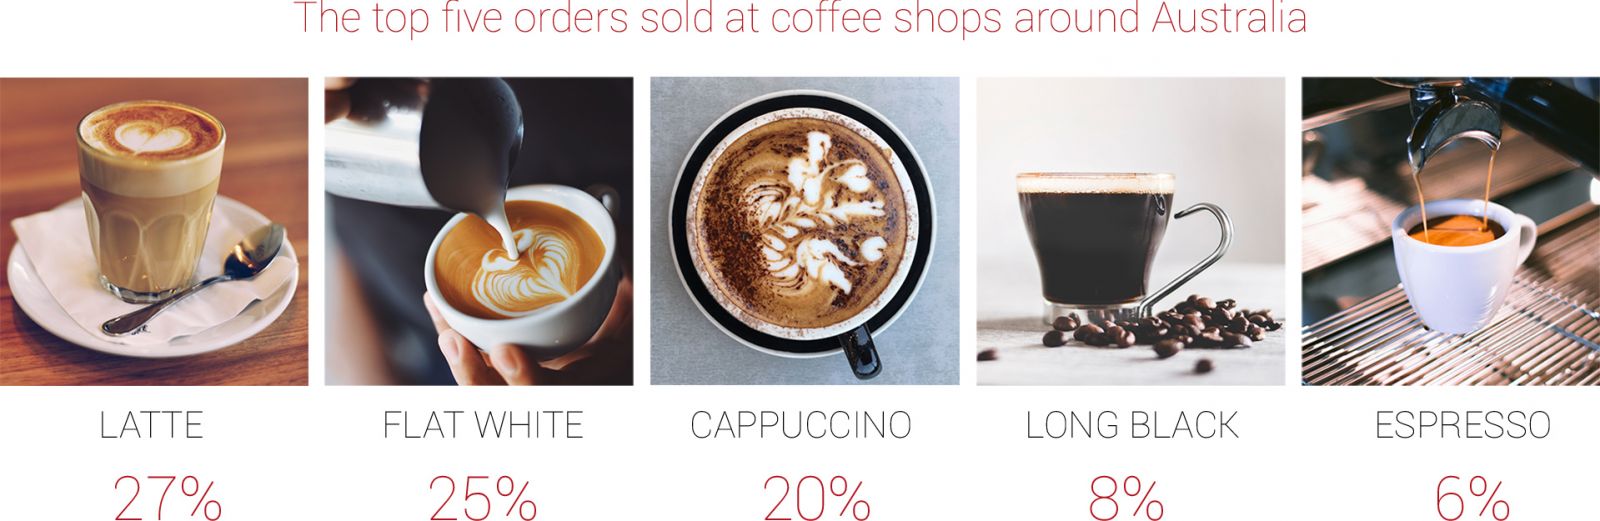 Infographic on the most popular coffee orders in Australia